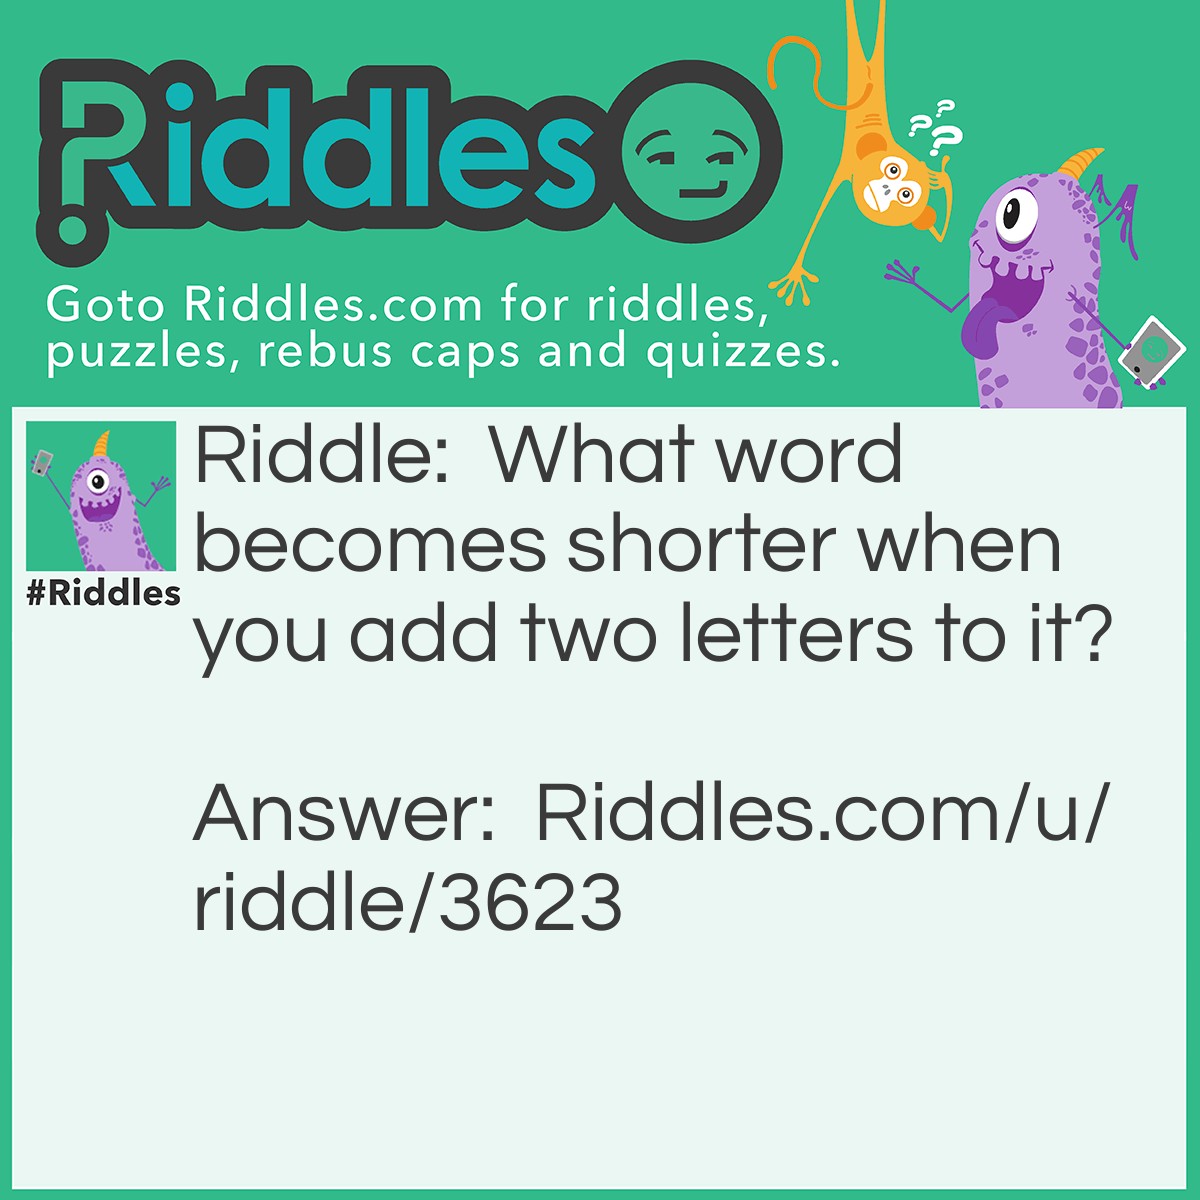 Riddle: What word becomes shorter when you add two letters to it? Answer: Short (If you add an er to the end it becomes the word shorter).